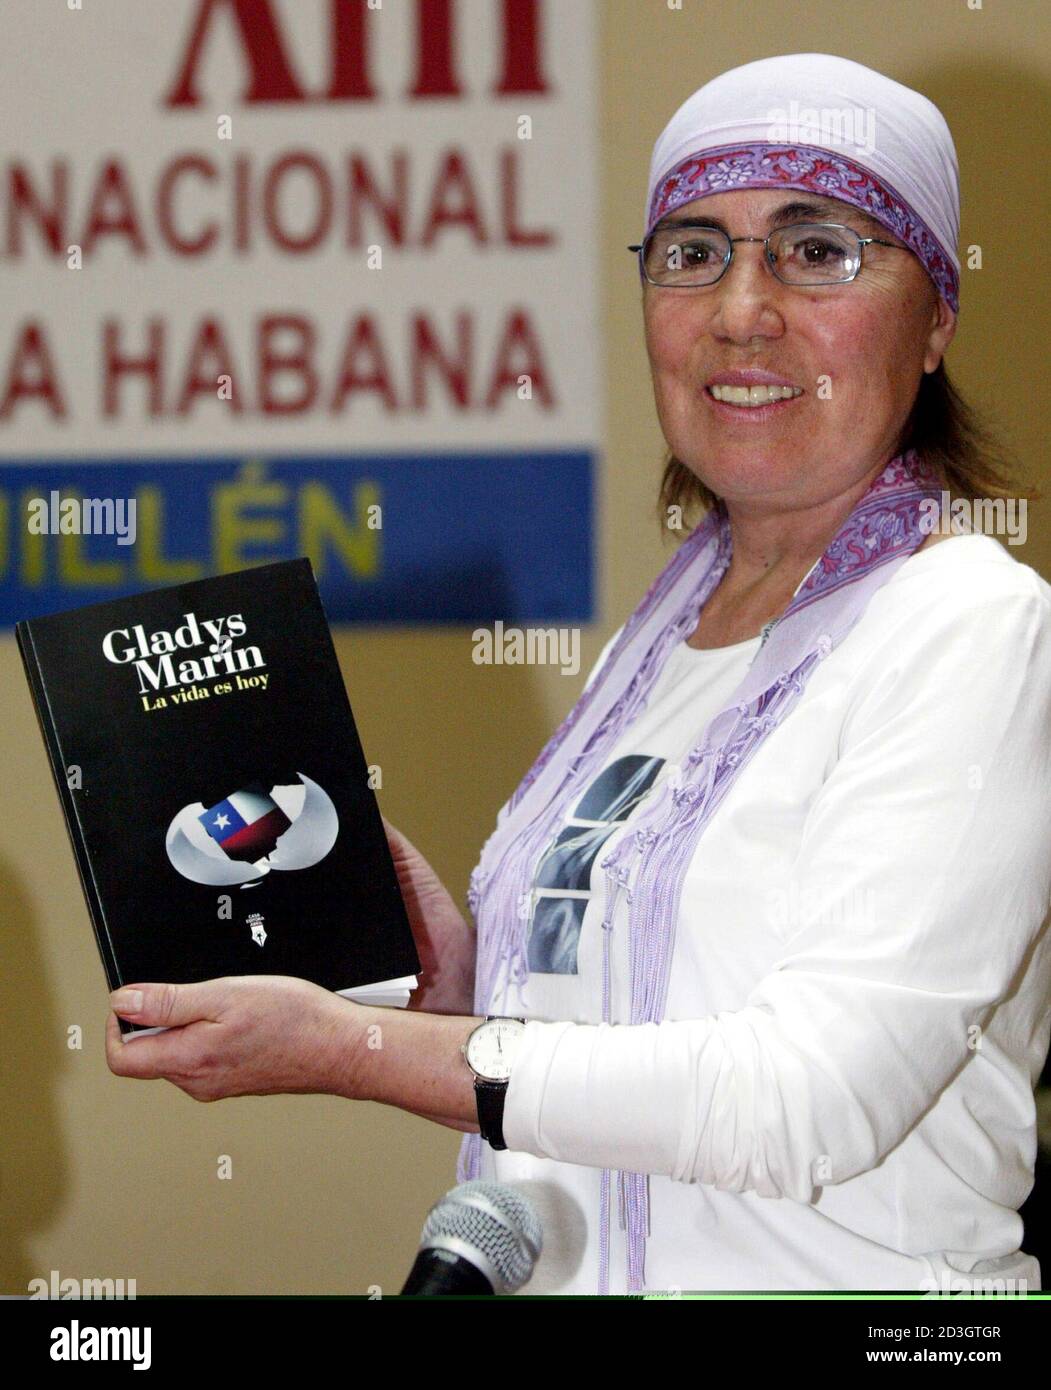 Gladys Marin, head of the Chilean Communist party, presents her book 